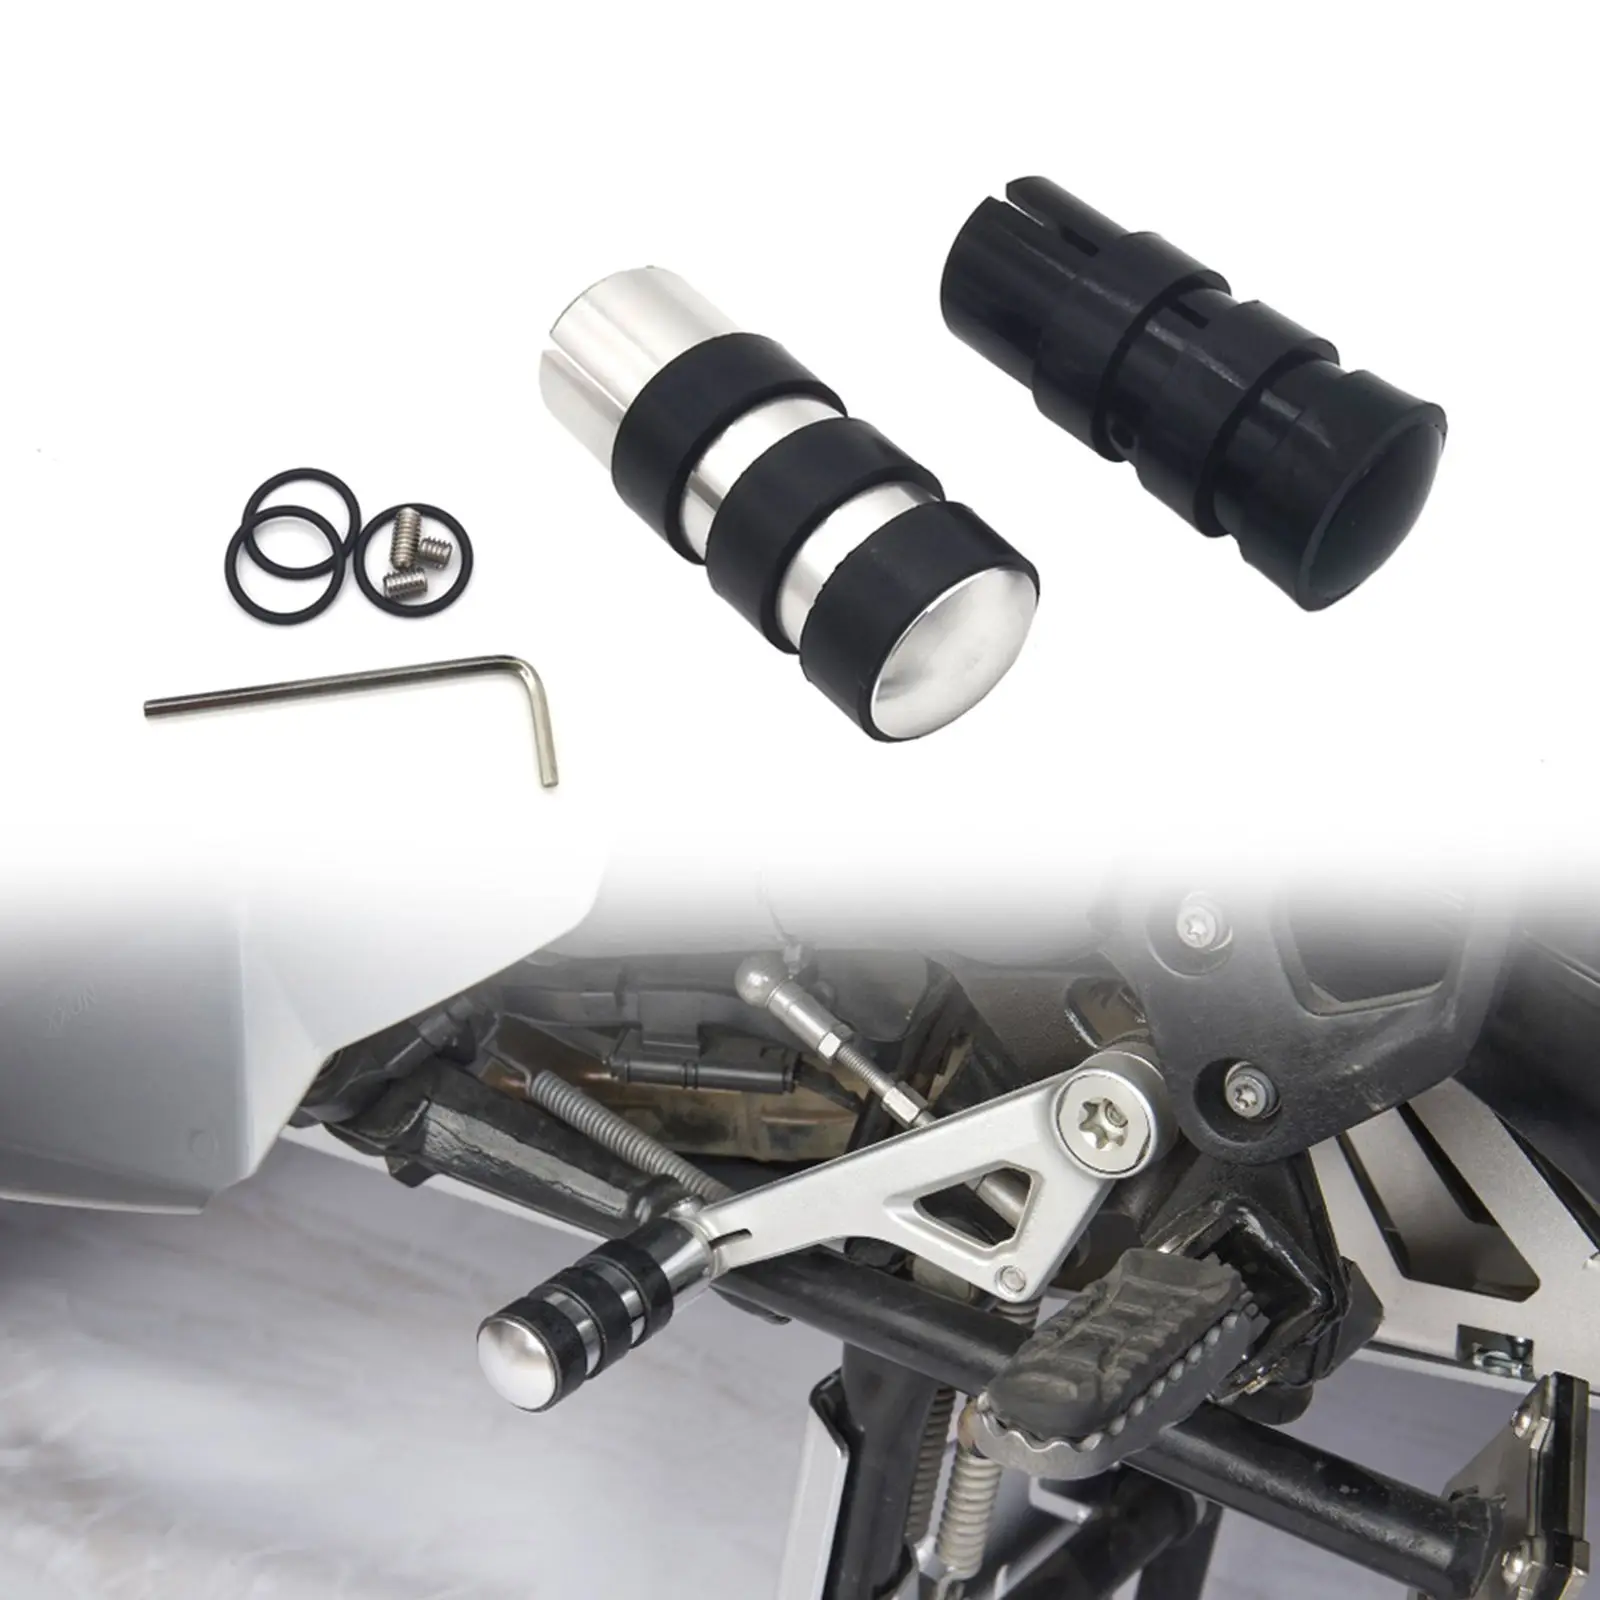 Gear Lever Peg Enlarger Anti-Corrosion Anti-Rust Motorcycle Fit for BMW F900XR F700GS